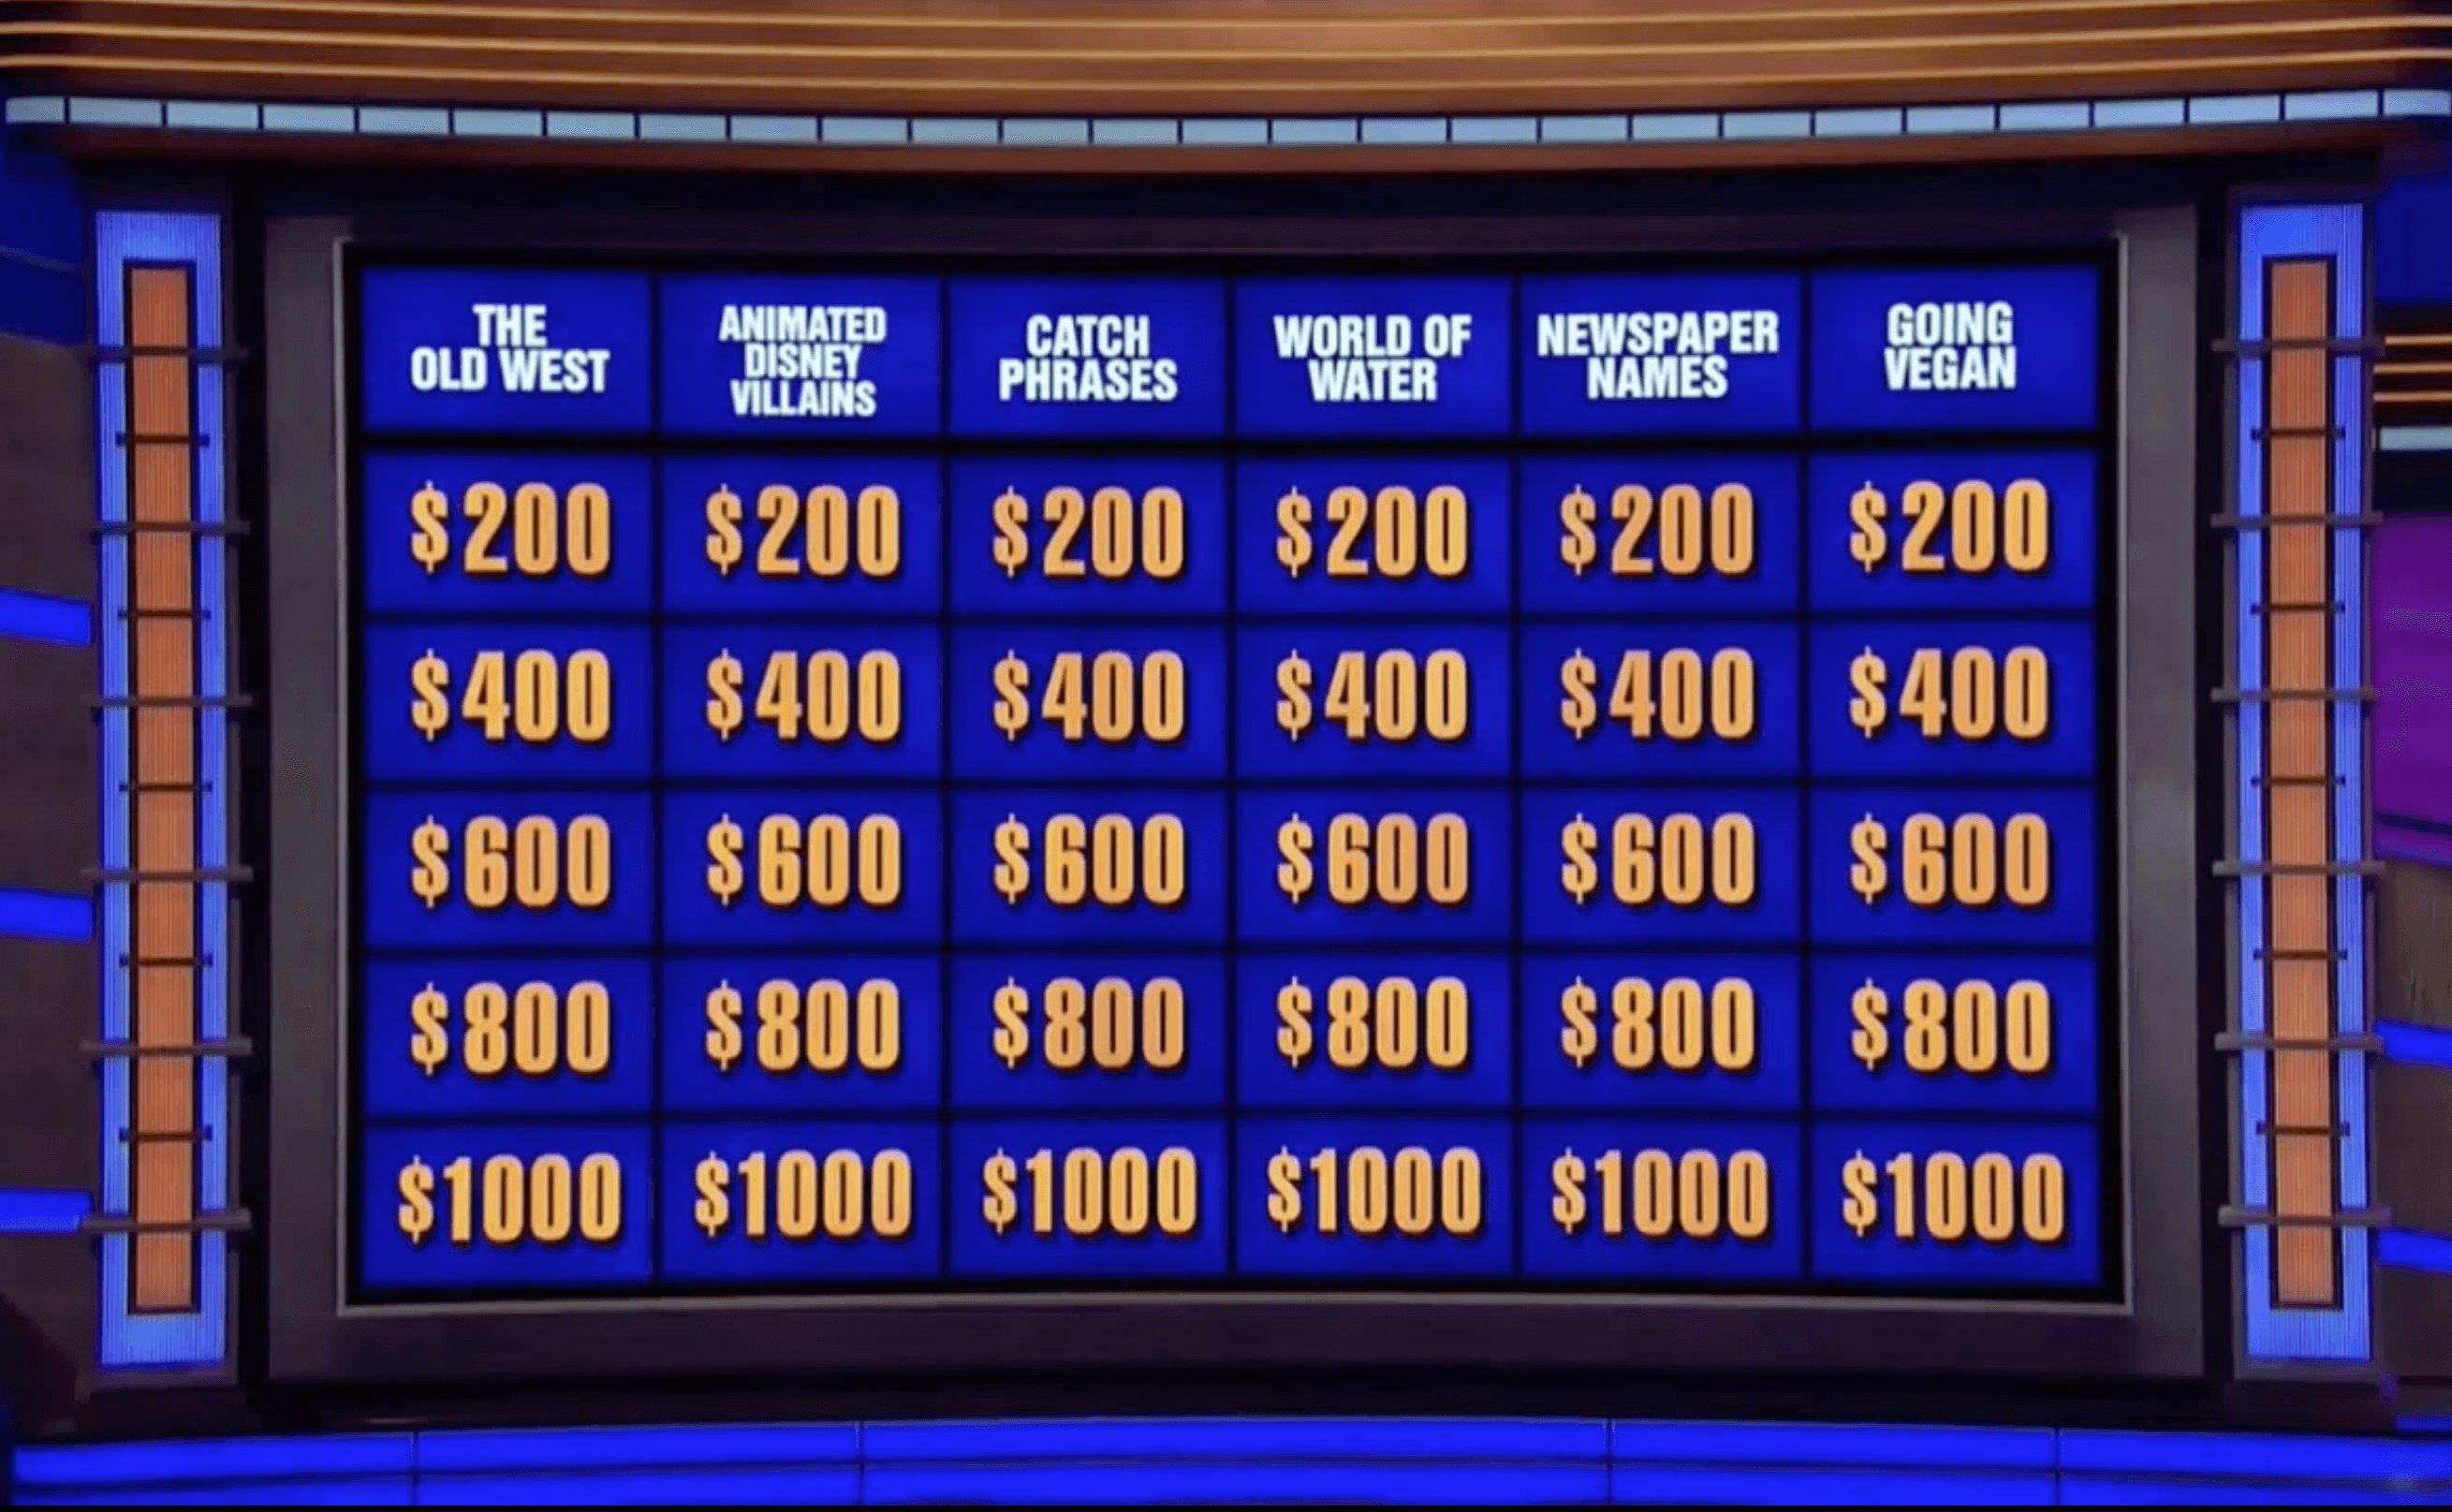 Jeopardy Game Show Logo - Game Show 'Jeopardy!' Tests Contestants Knowledge on 'Going Vegan'